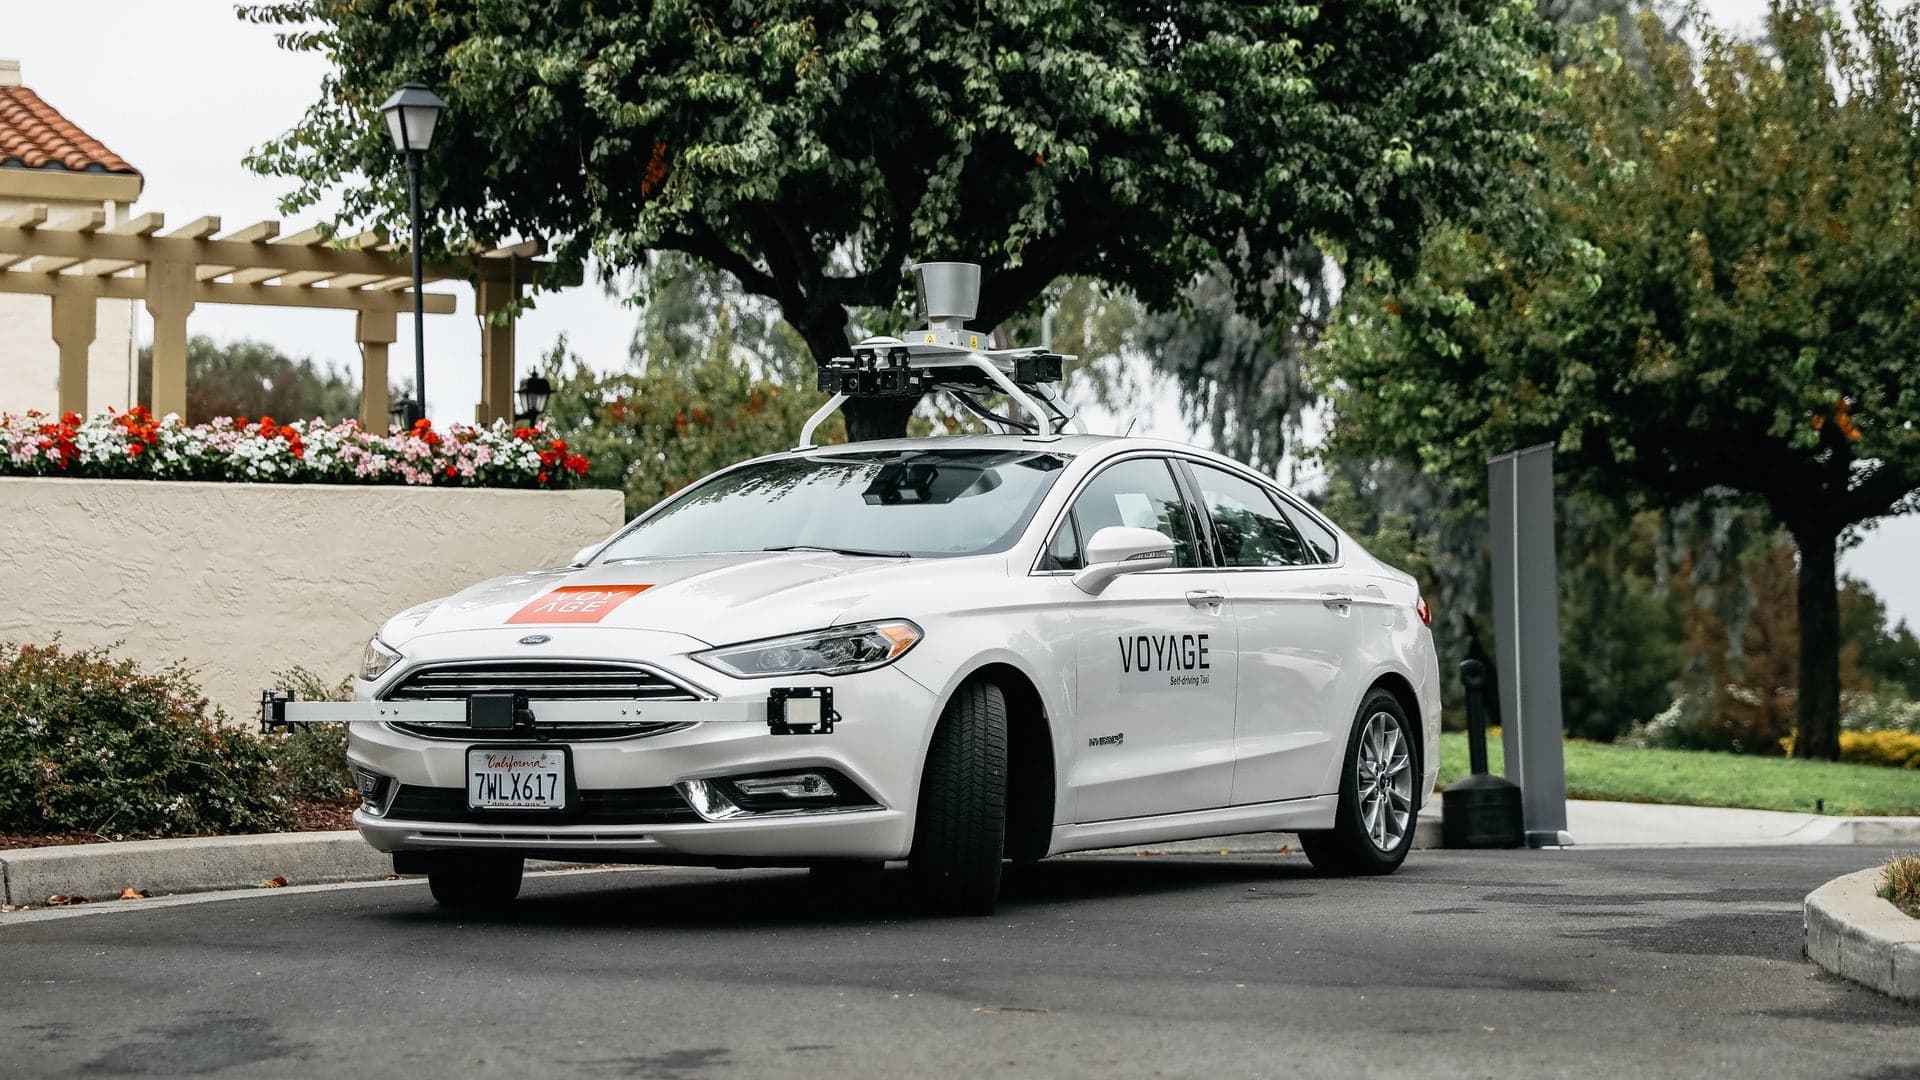 Startup Voyage Wants to Open Source Self-Driving Car Safety